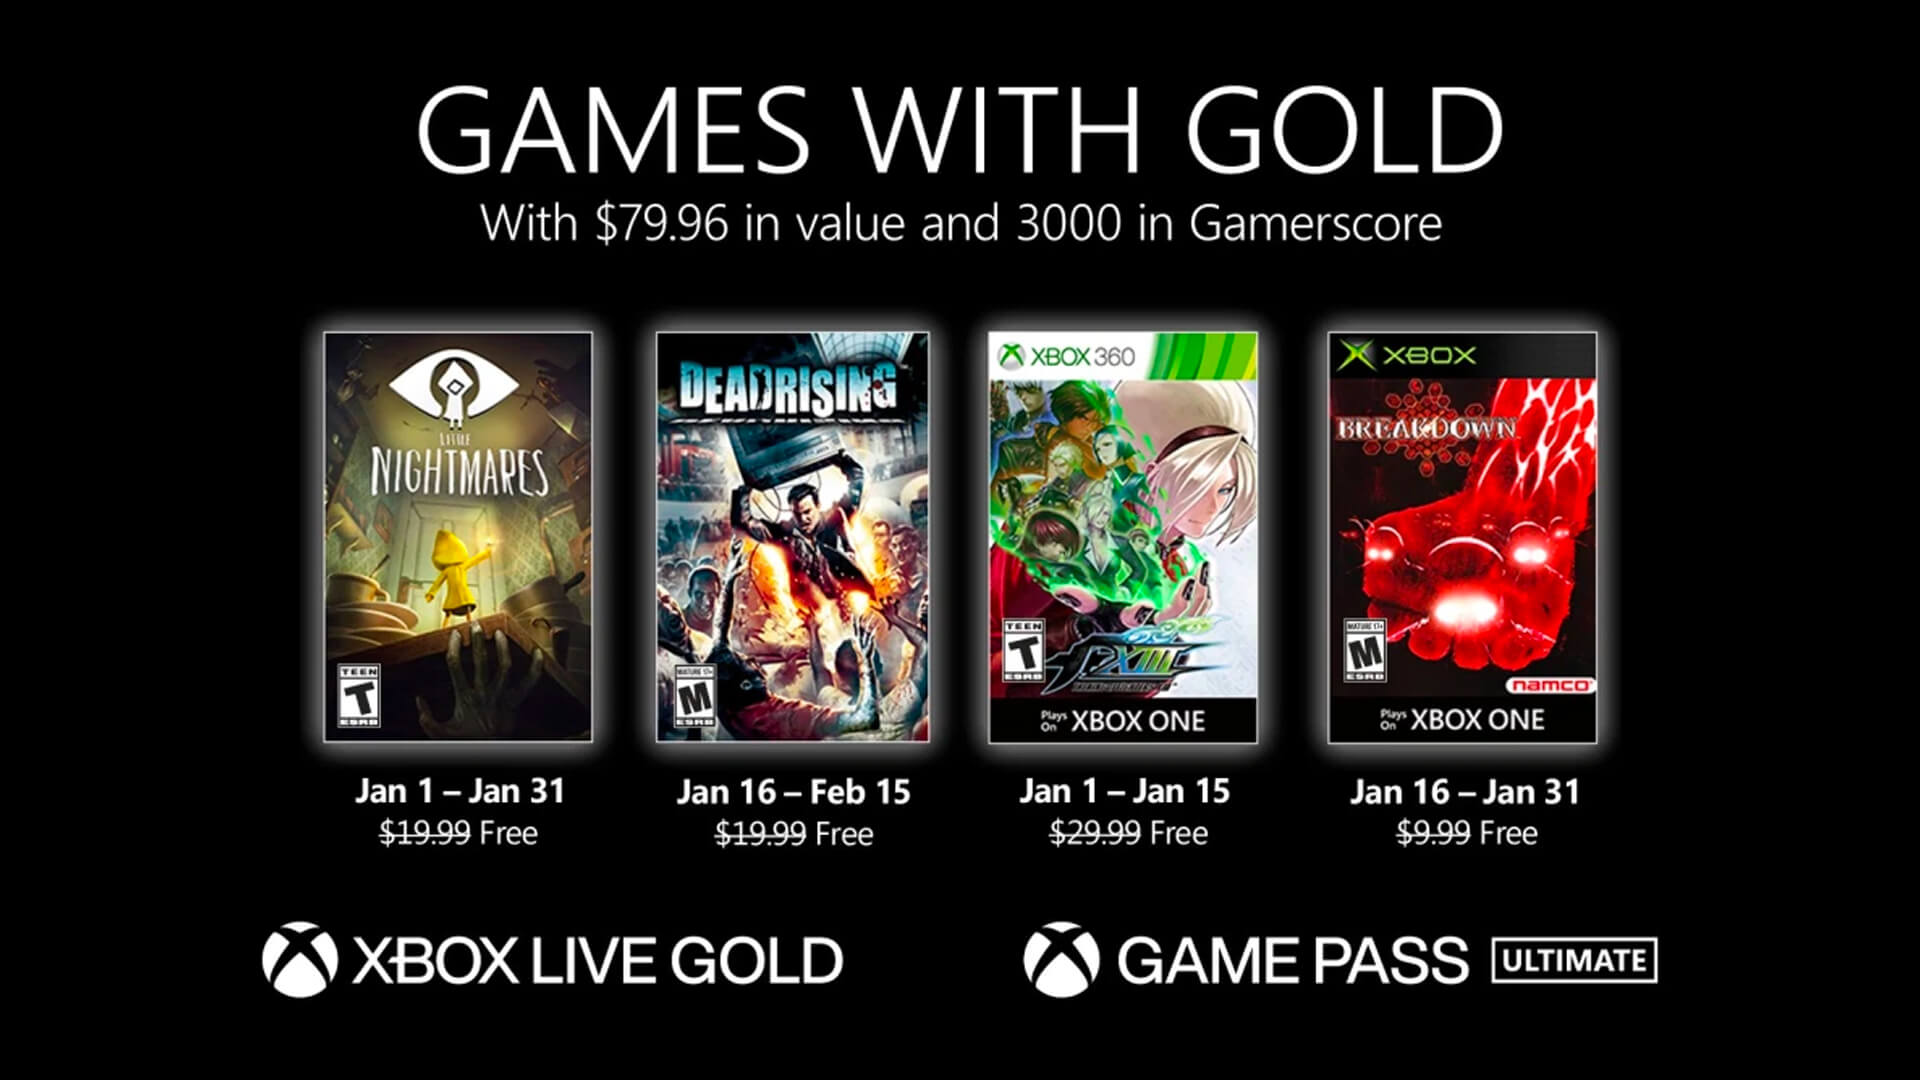 Xbox Free Games with Gold for January 2021